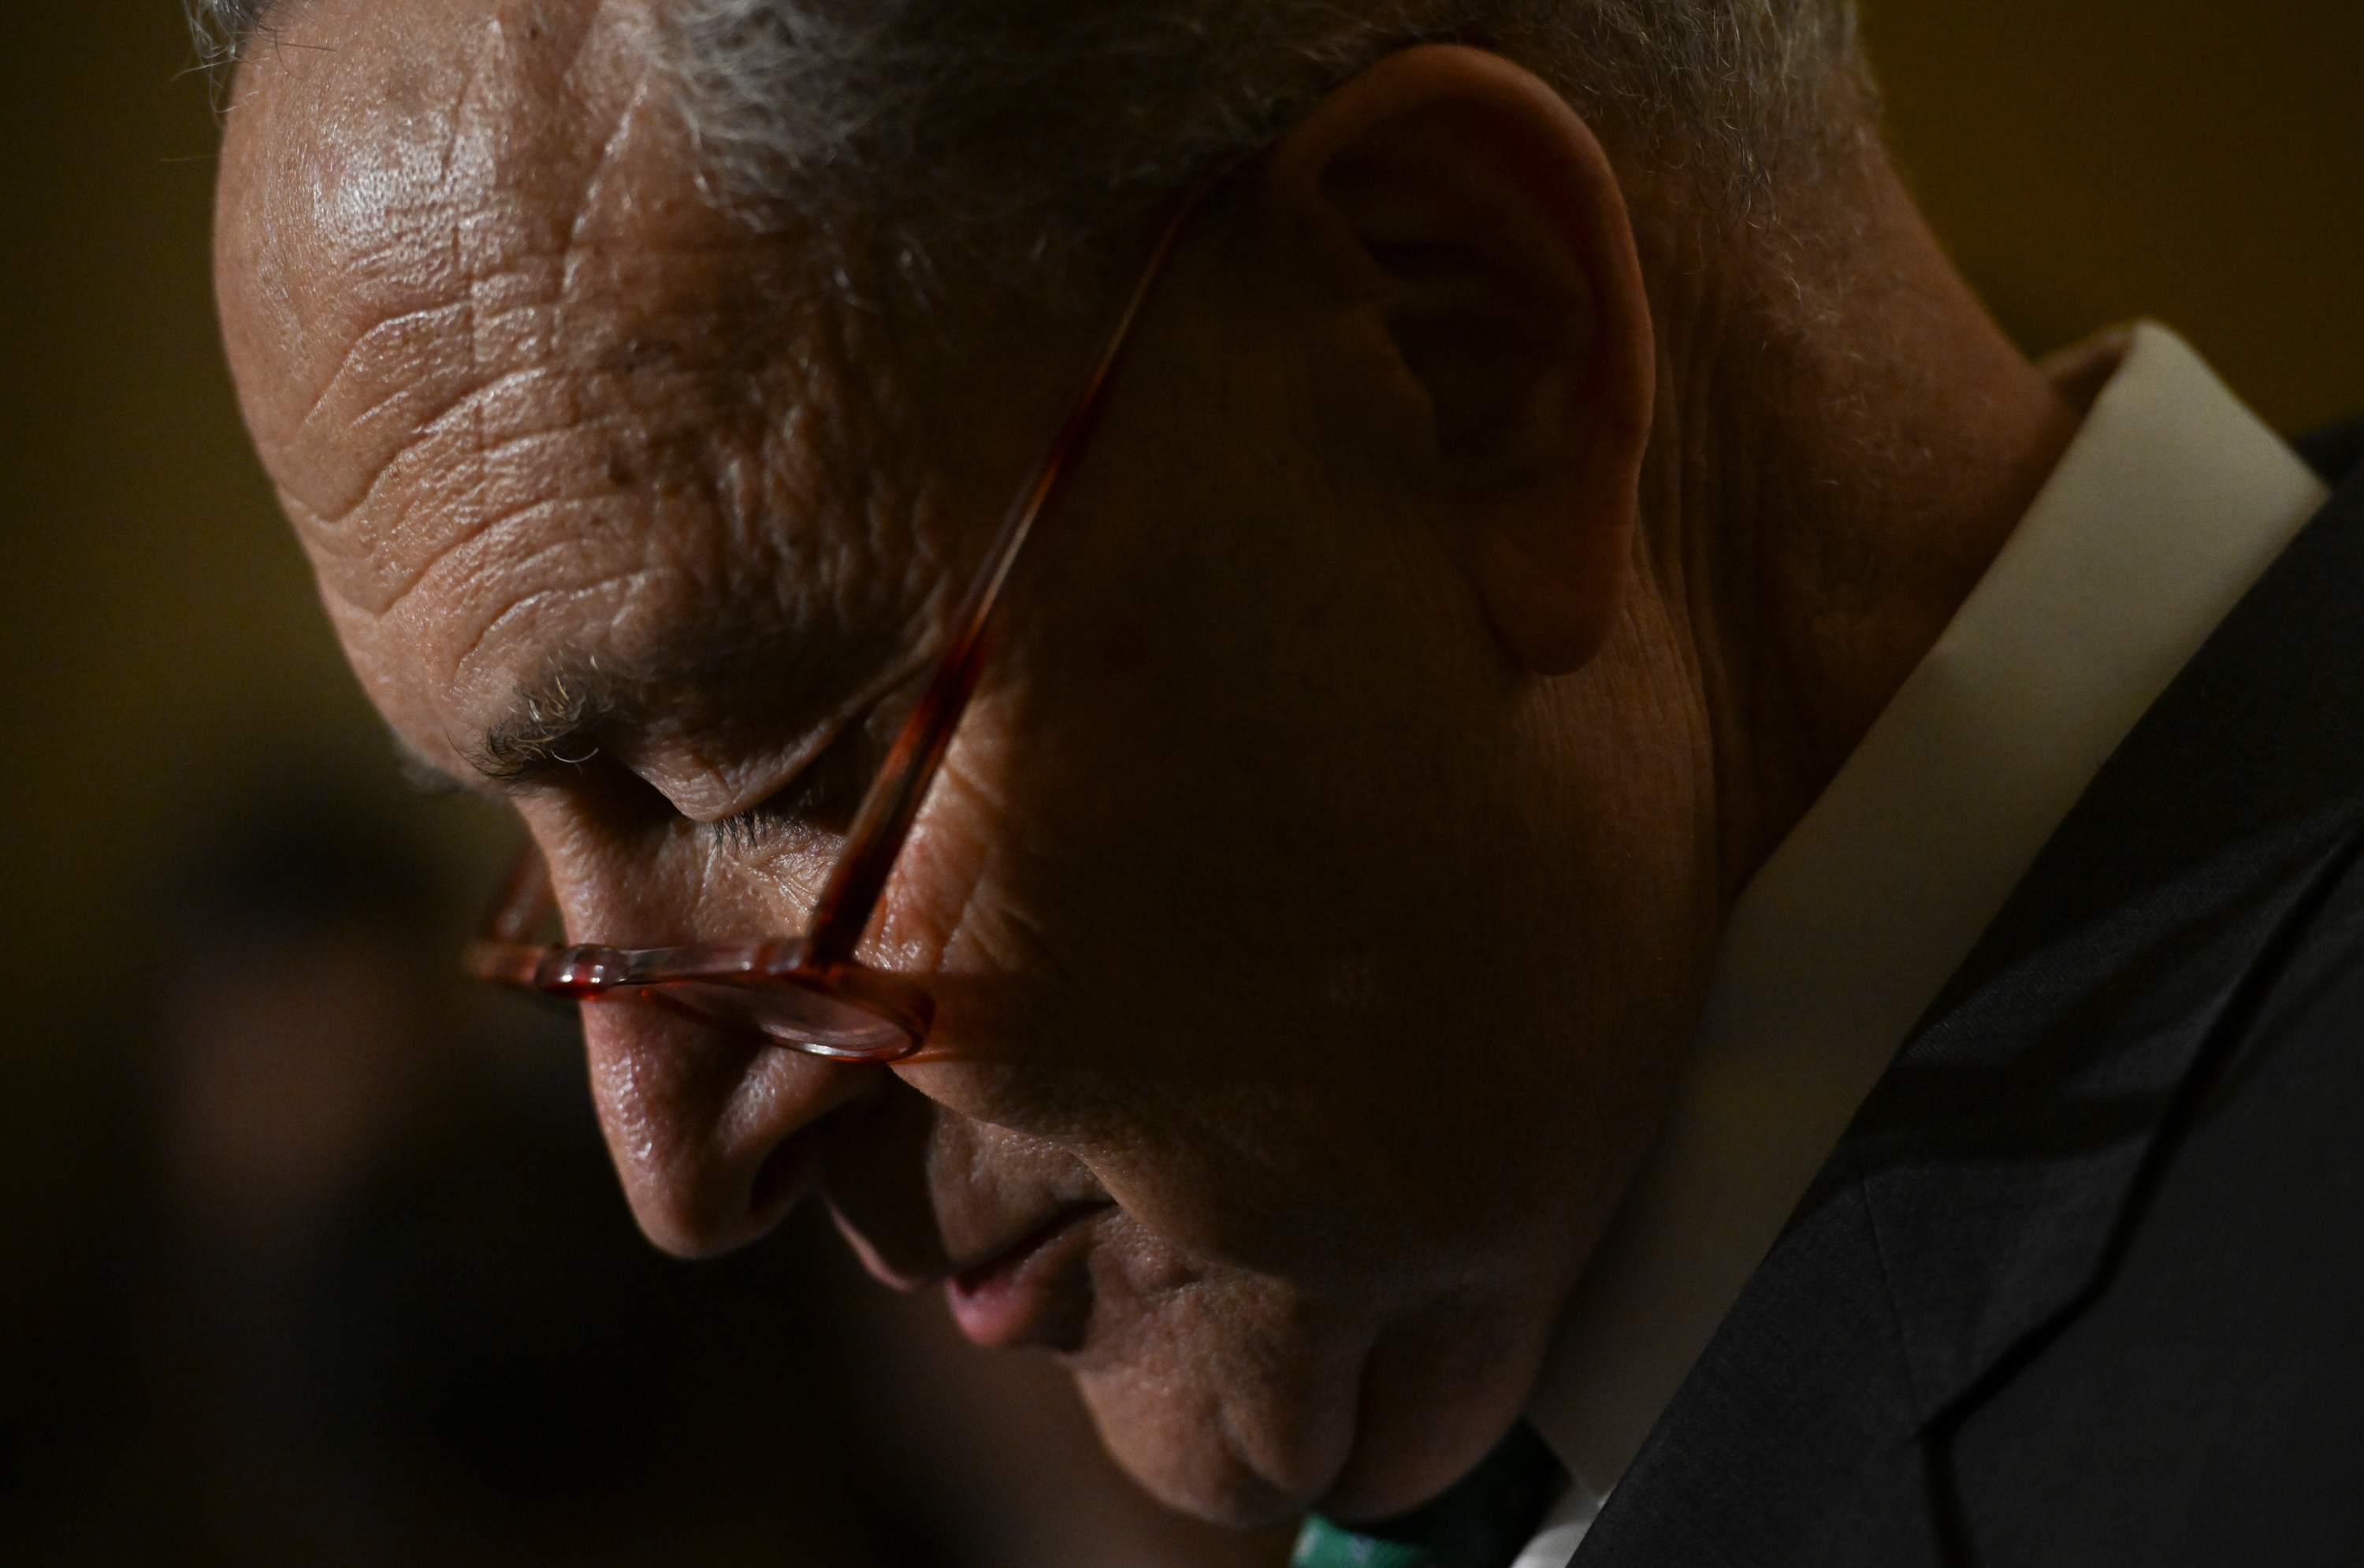 Senate Majority Leader Chuck Schumer pauses while speaking to the media at the Capitol, in Washington, DC on March 15.